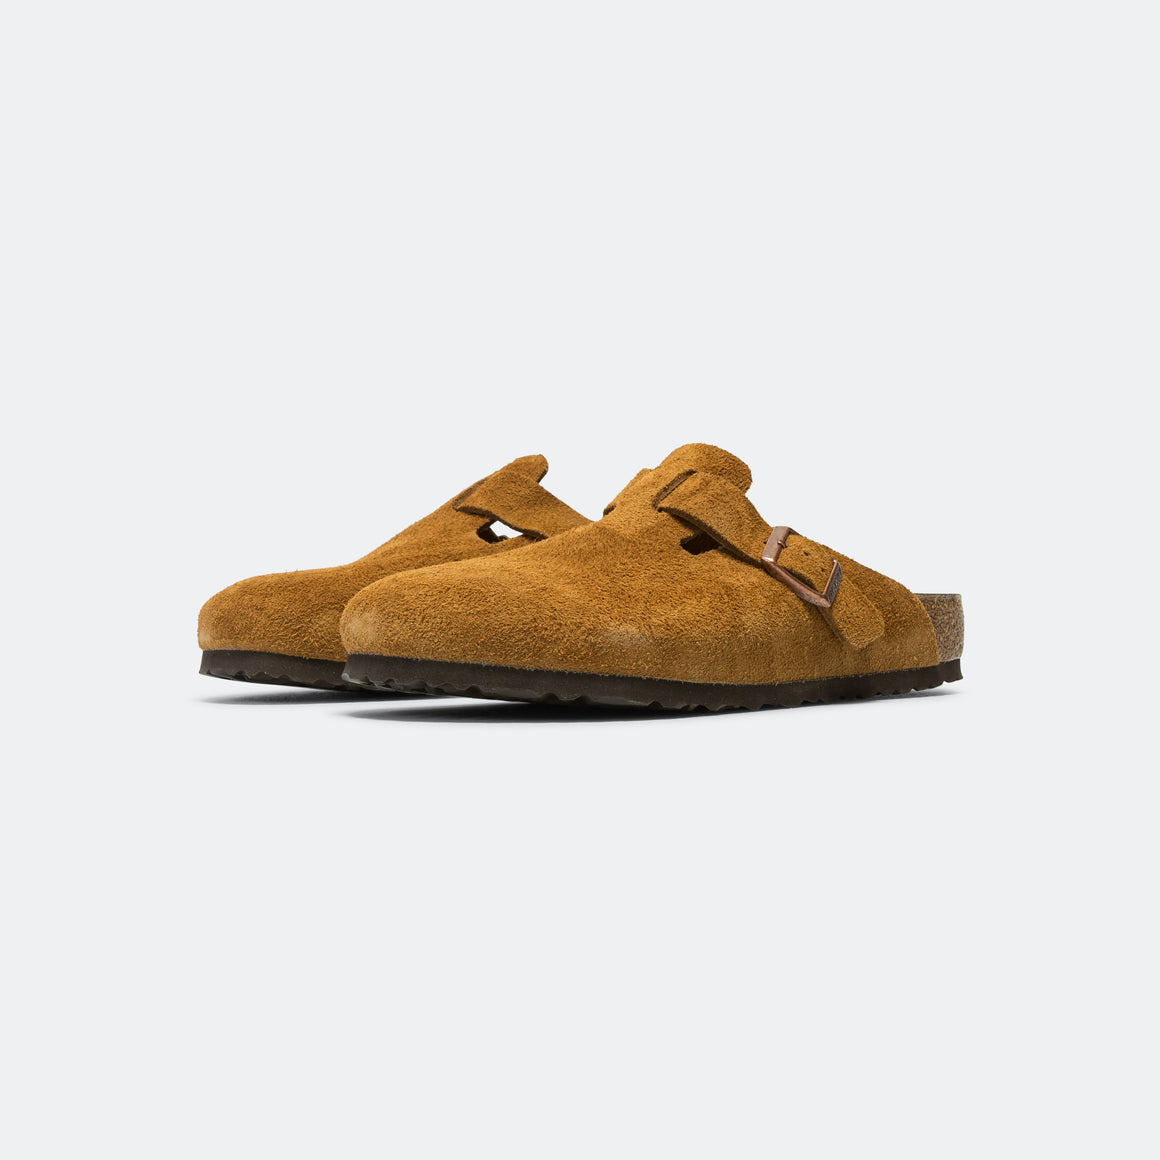 Birkenstock - Boston SFB - Mink Suede Leather - UP THERE